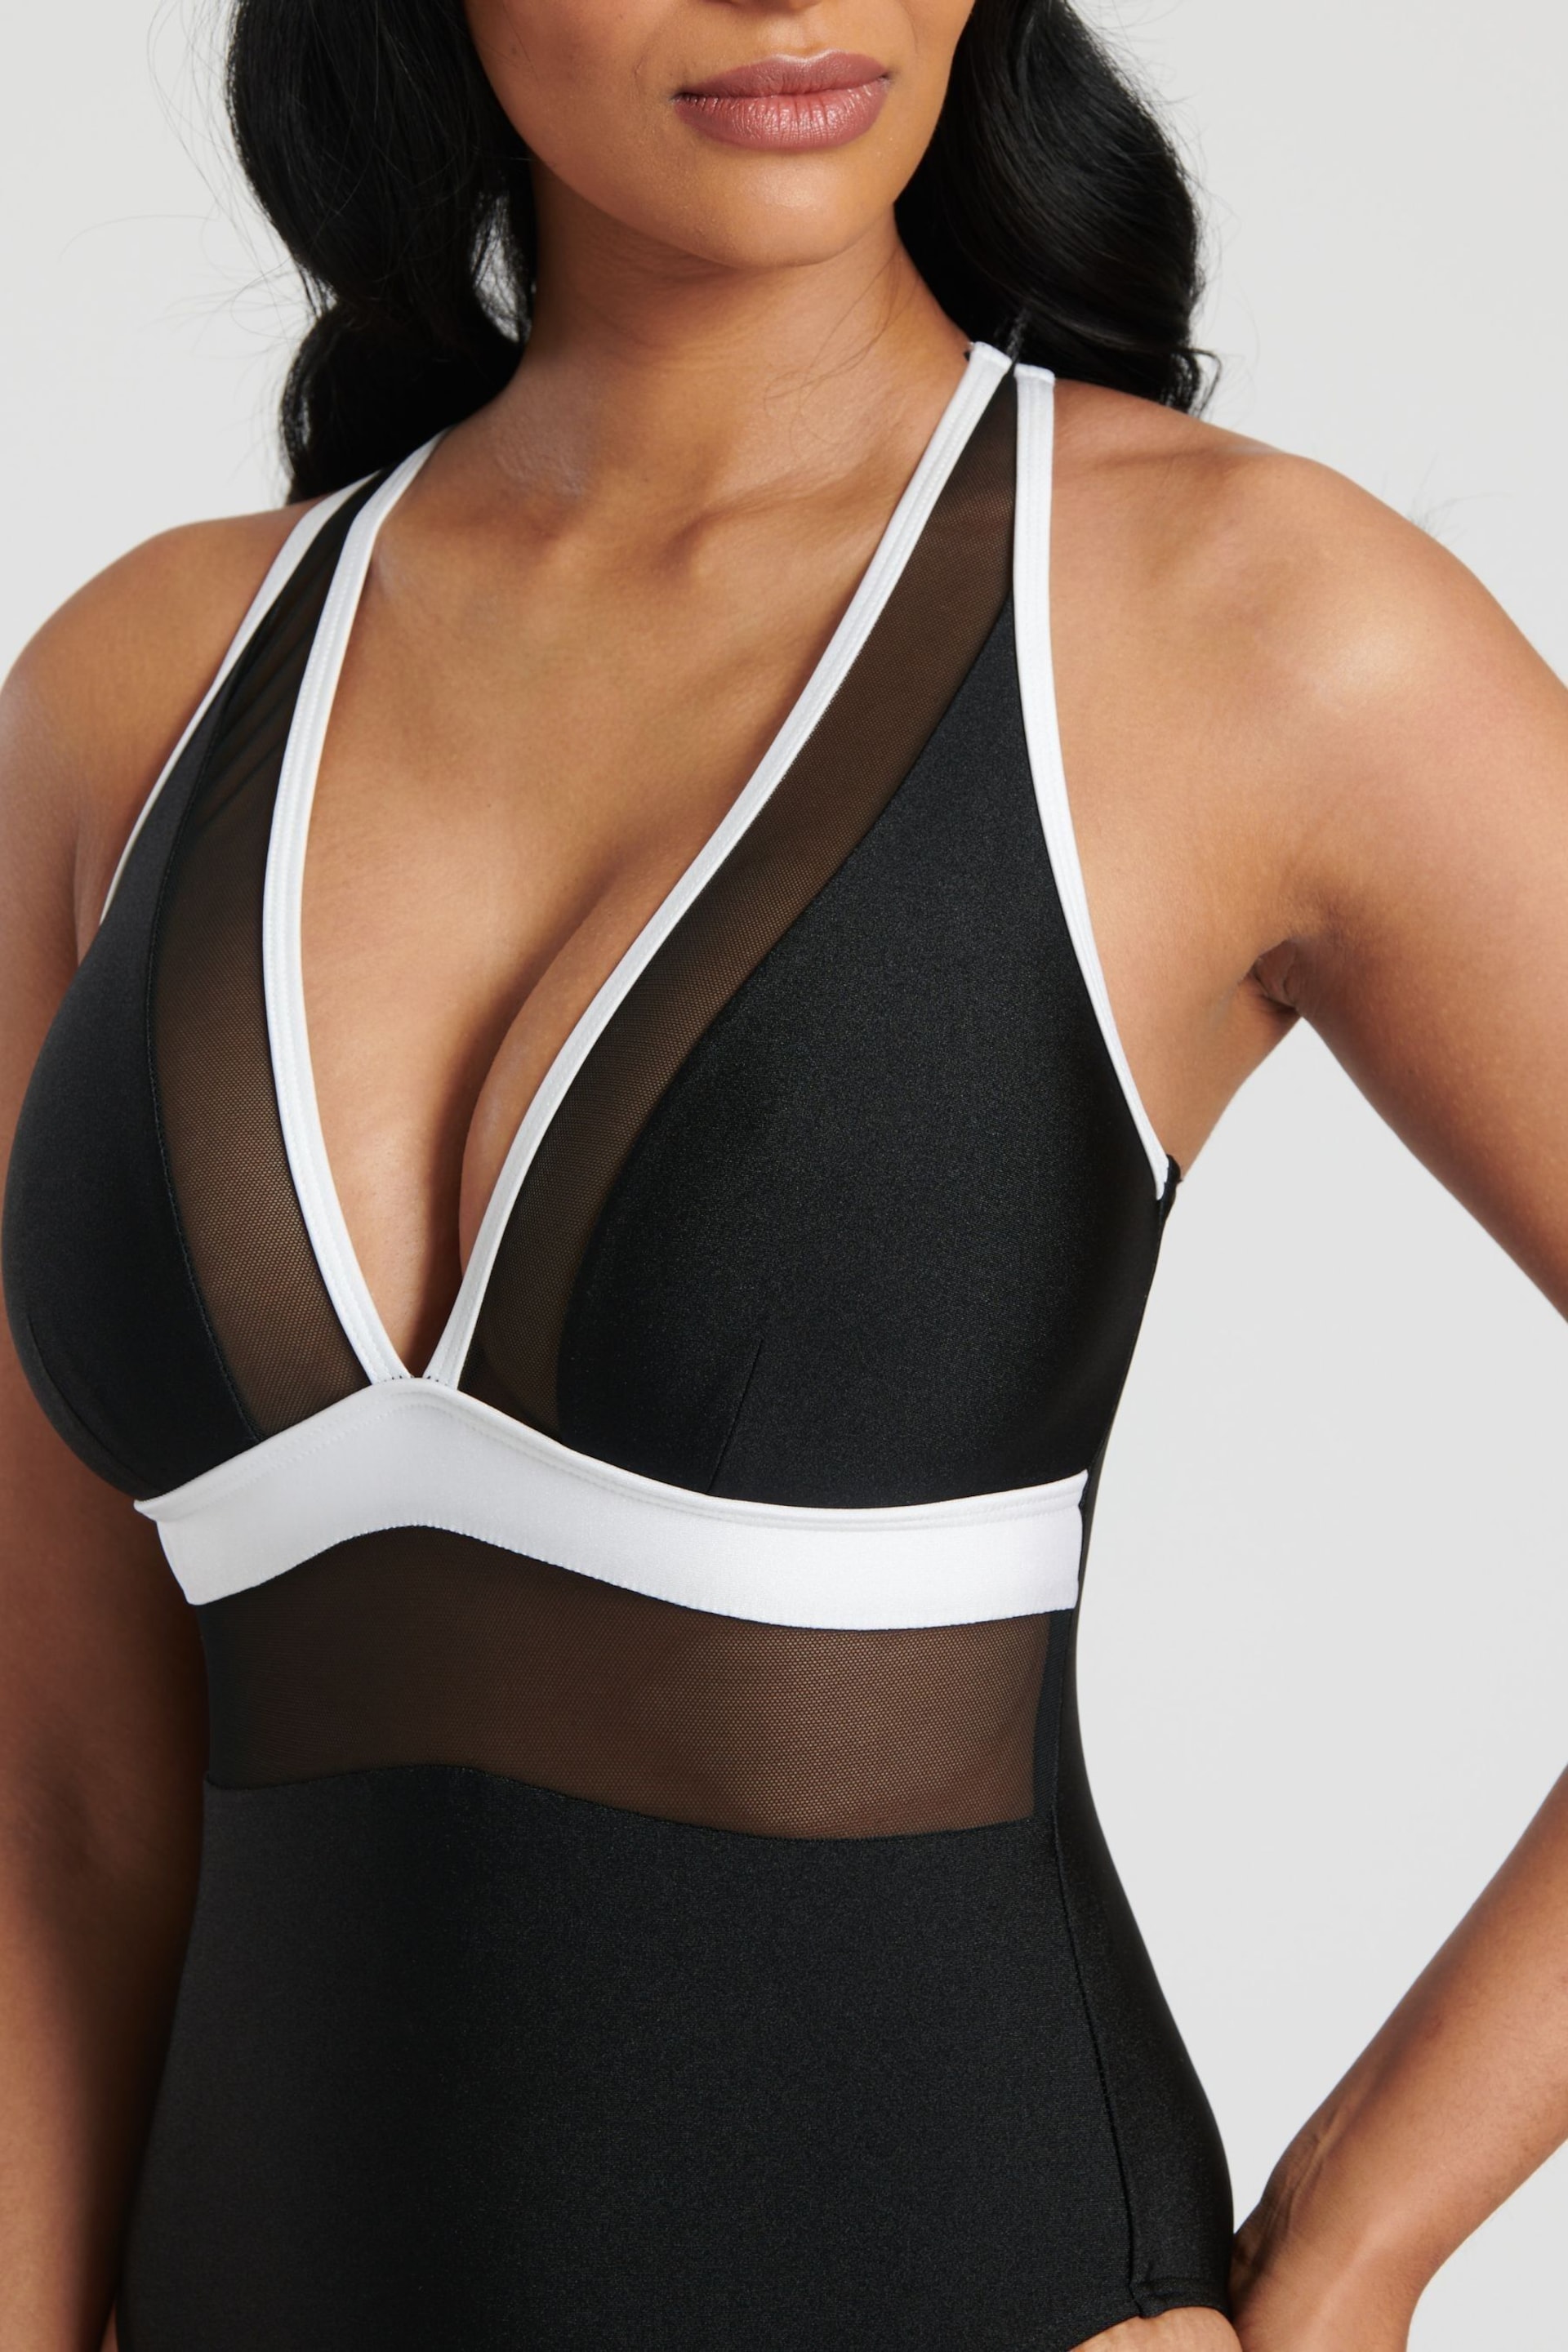 South Beach Monochrome Mesh Plunge Swimsuit - Image 2 of 6